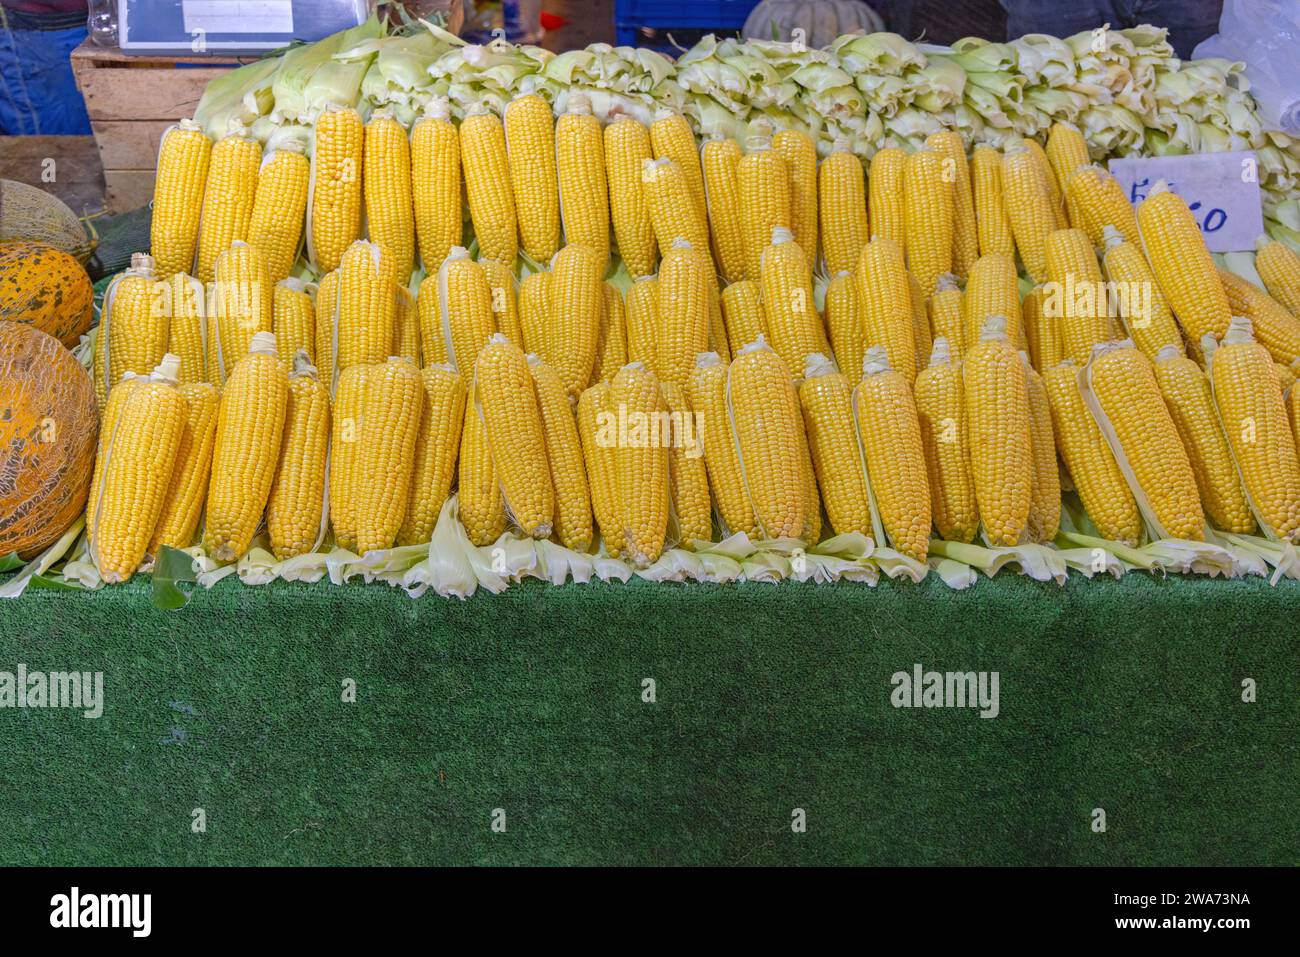 Corn on the Cob at Farmers Market Stall Stock Photo